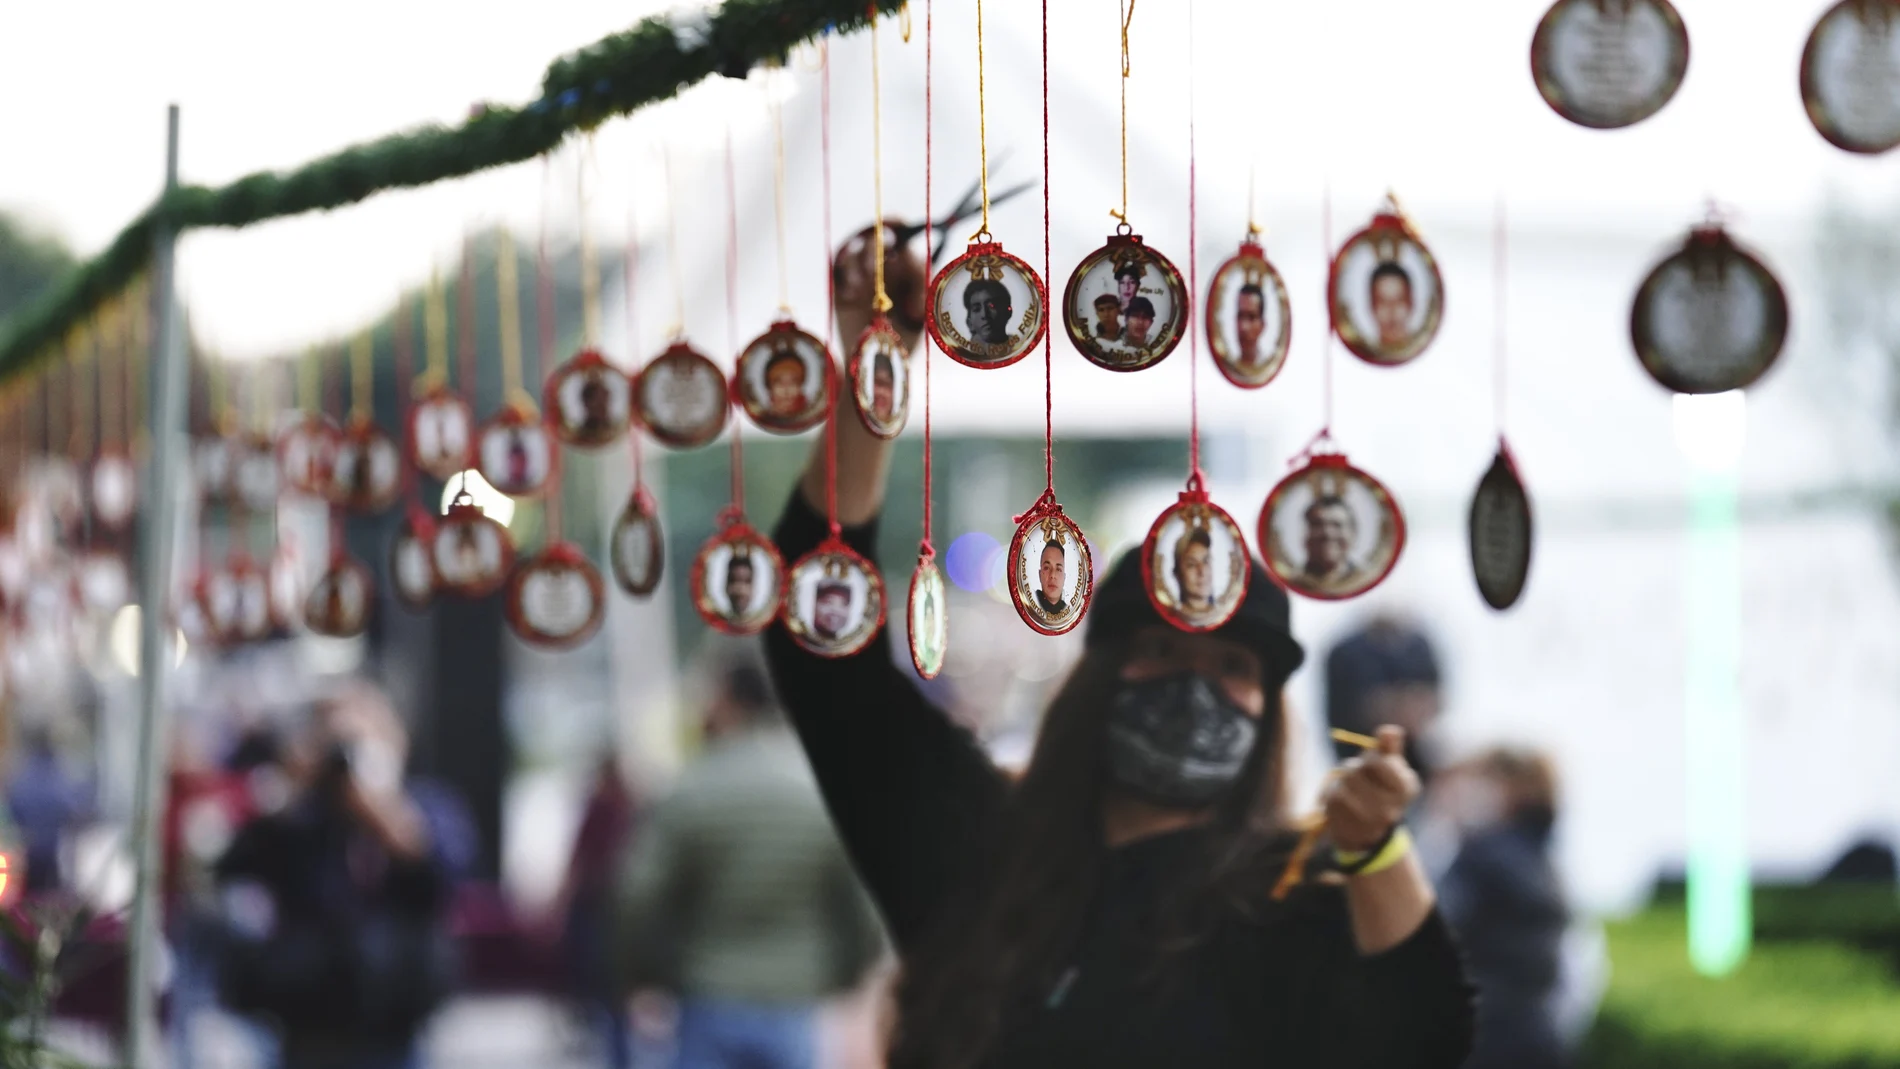 Relatives place Christmas decorations with images of their missing loved ones at the Memorial Garden of the City Government building of the borough of Iztacalco, in Mexico City, Tuesday, Dec. 14, 2021. (AP Photo/Marco Ugarte)